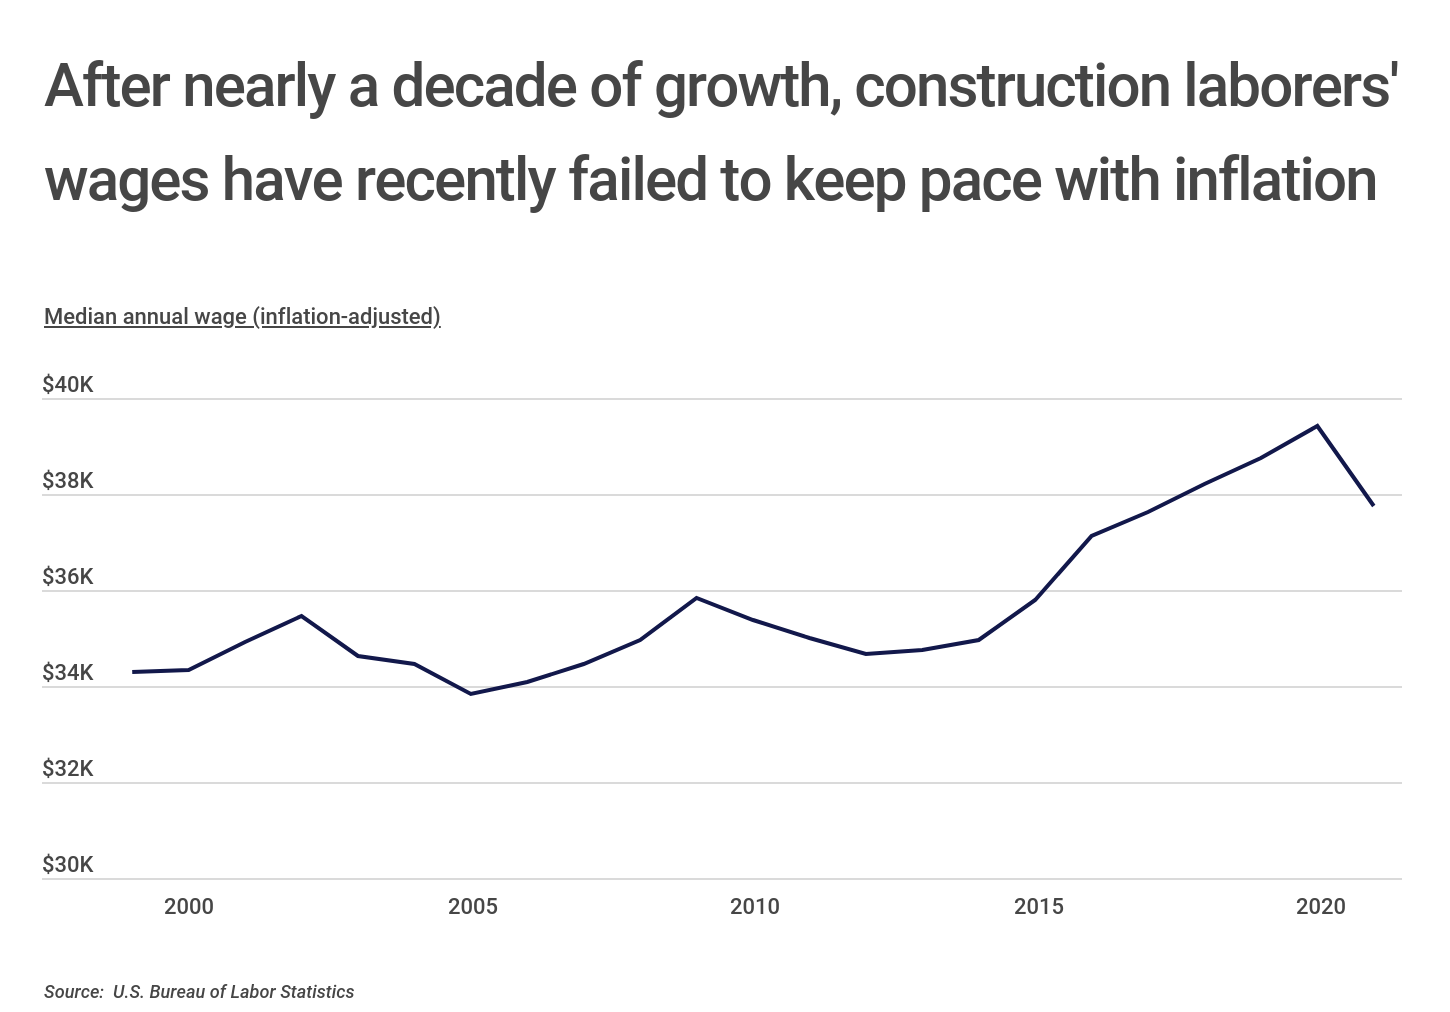 Chart2_Construction laborer wages have failed to keep pace with inflation